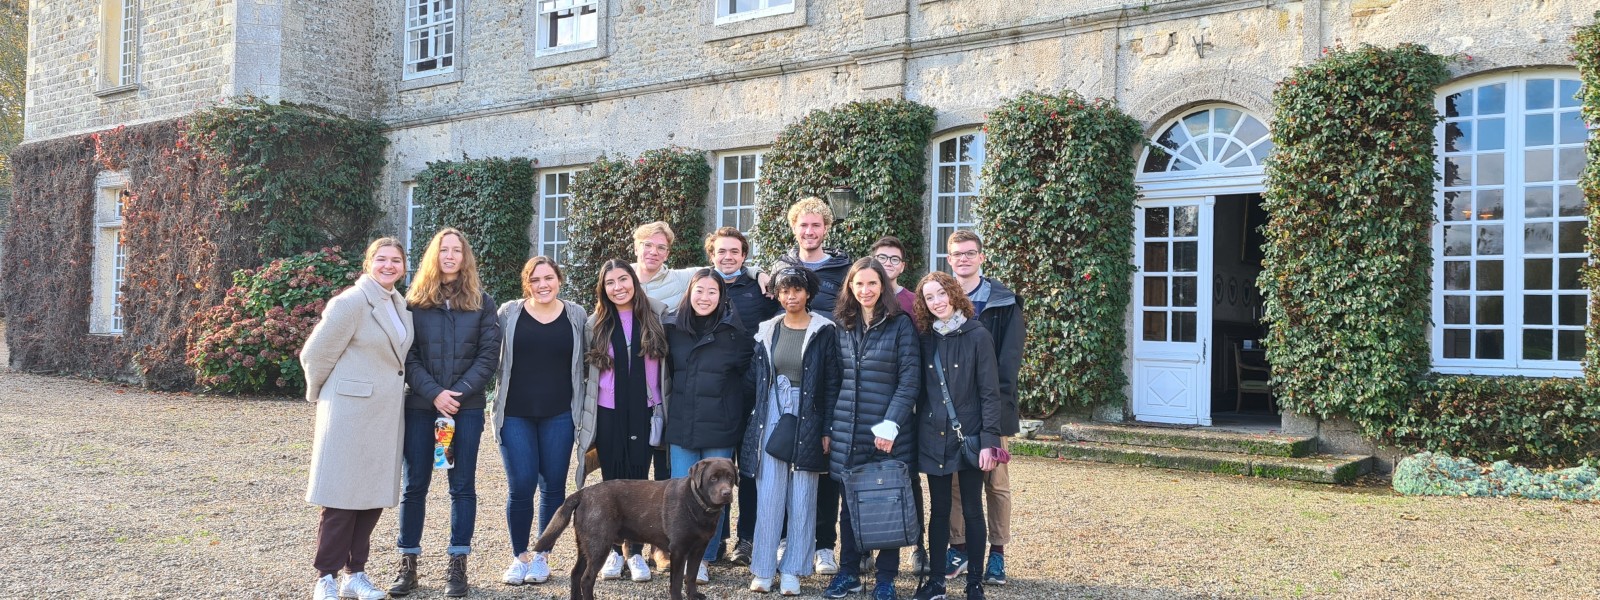 The group stands together in front of the château. A resident dog joined them for the photo.